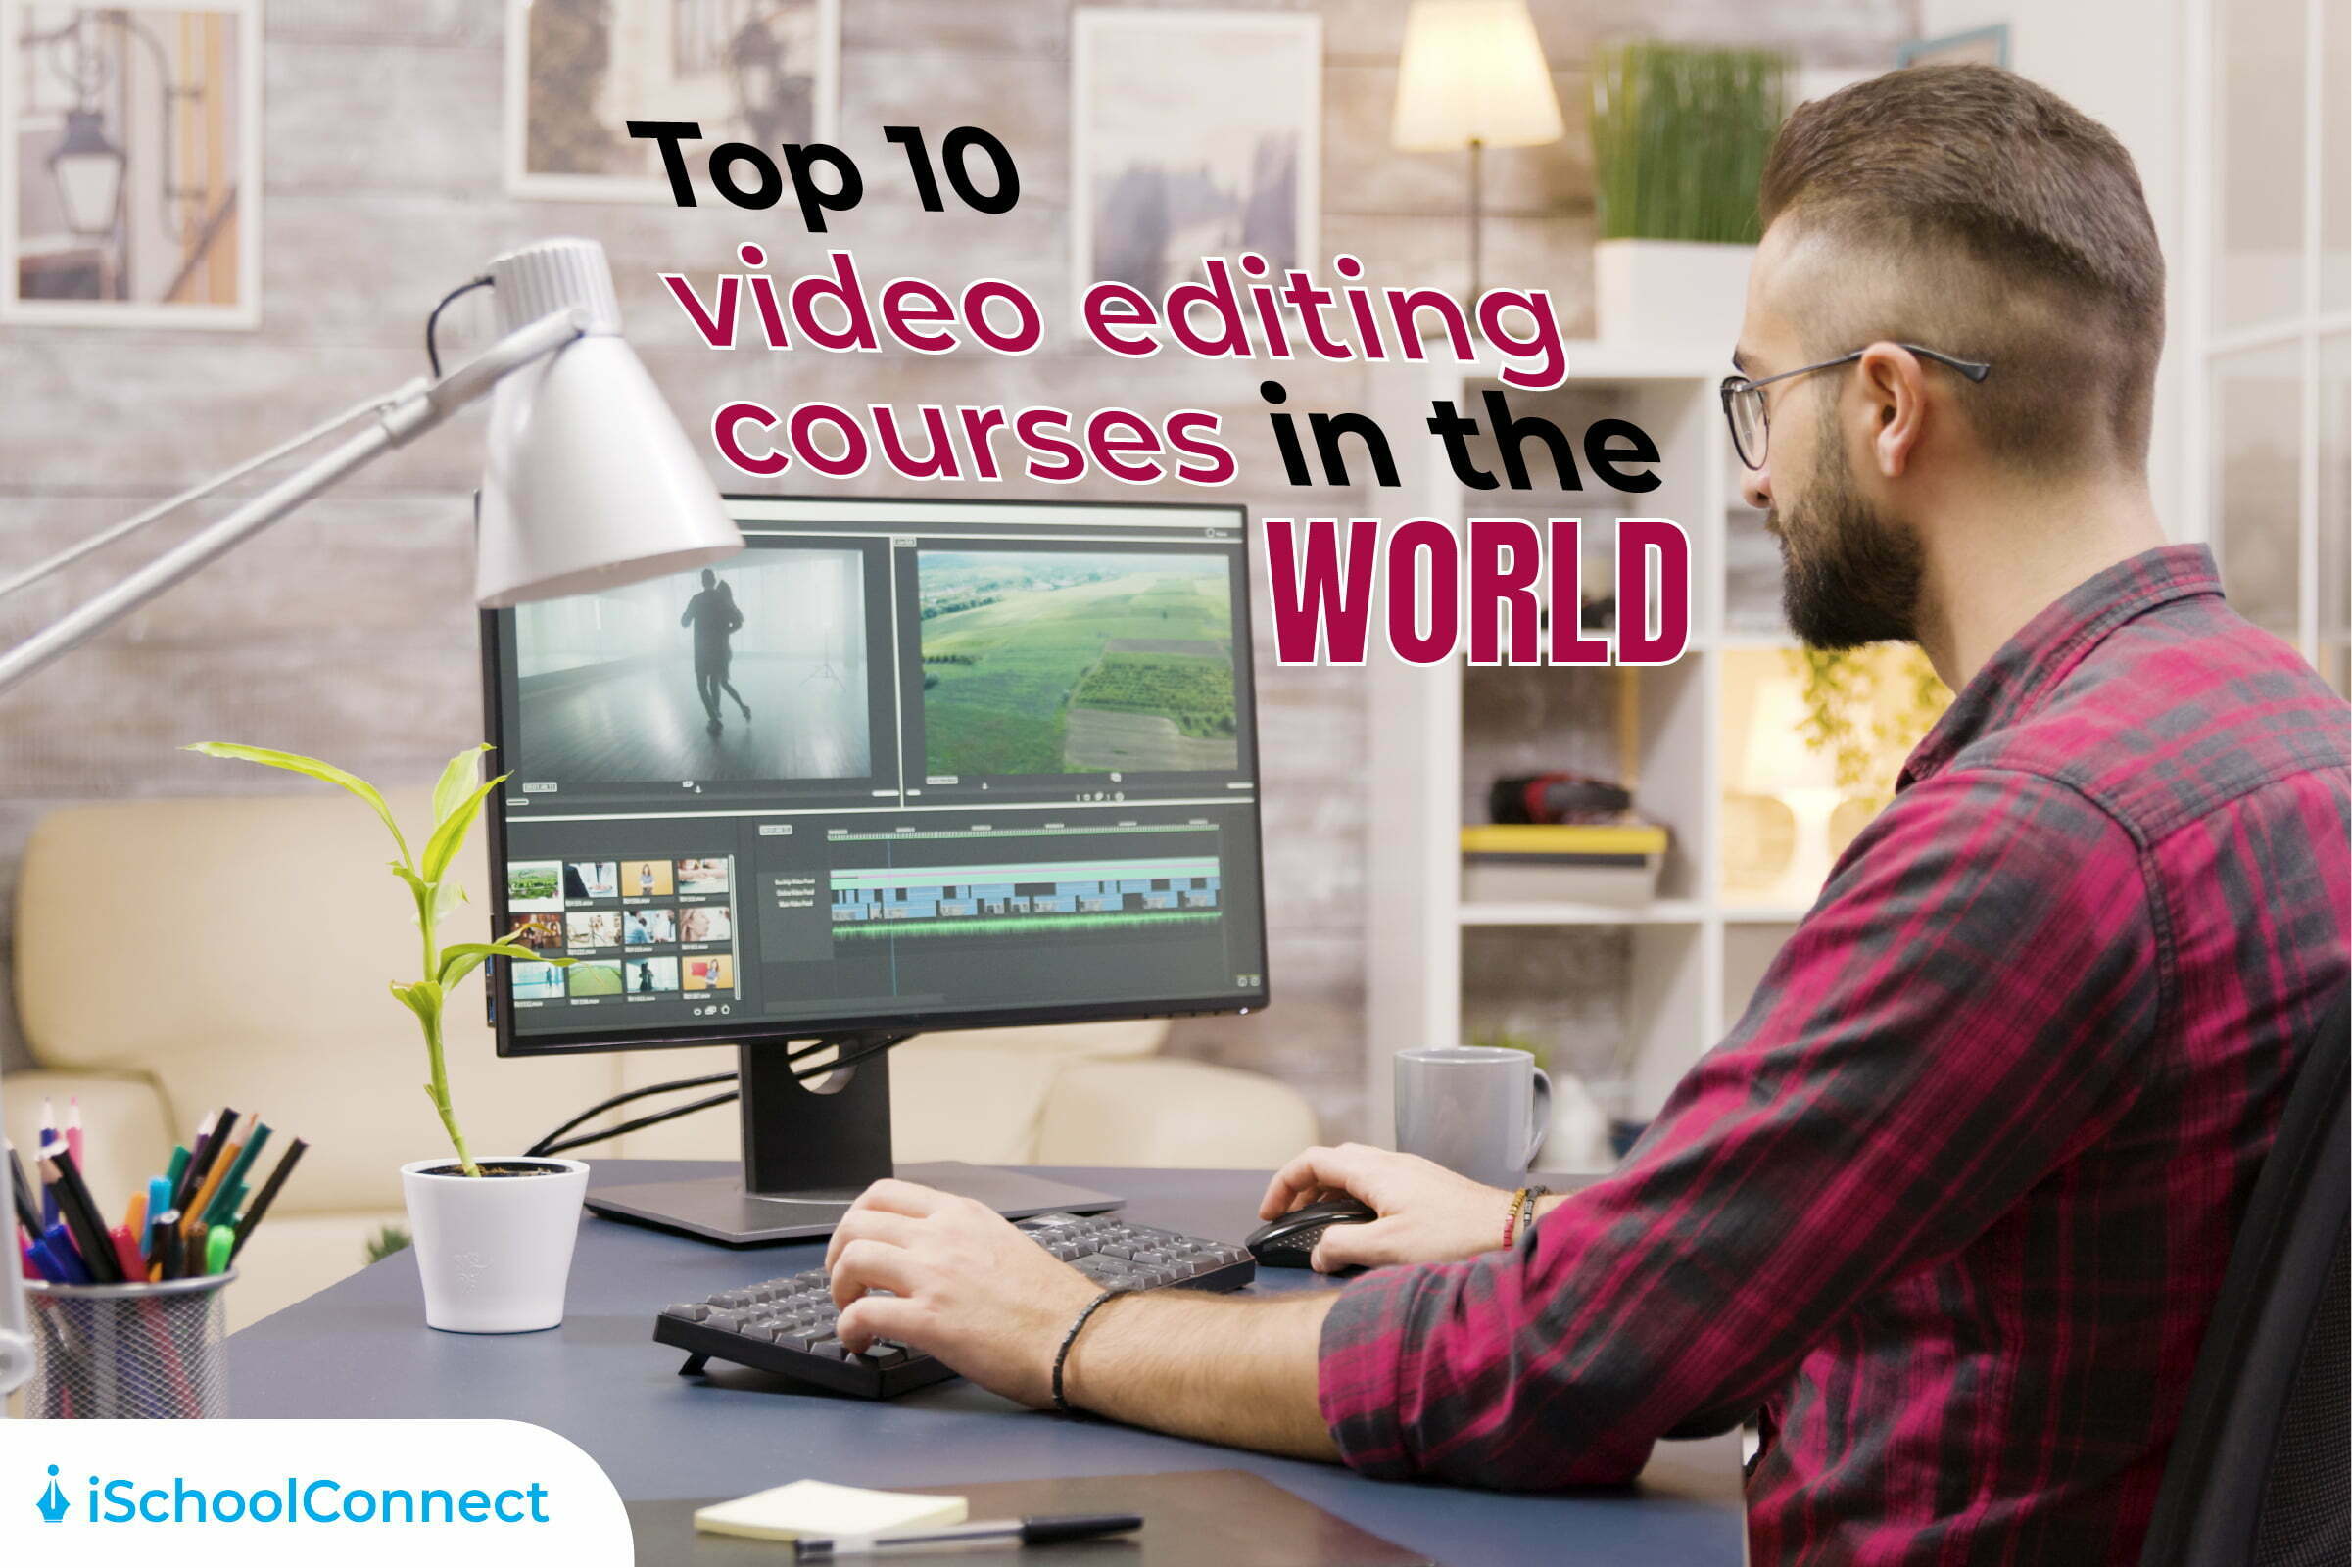 Top 10 video editing courses in the world